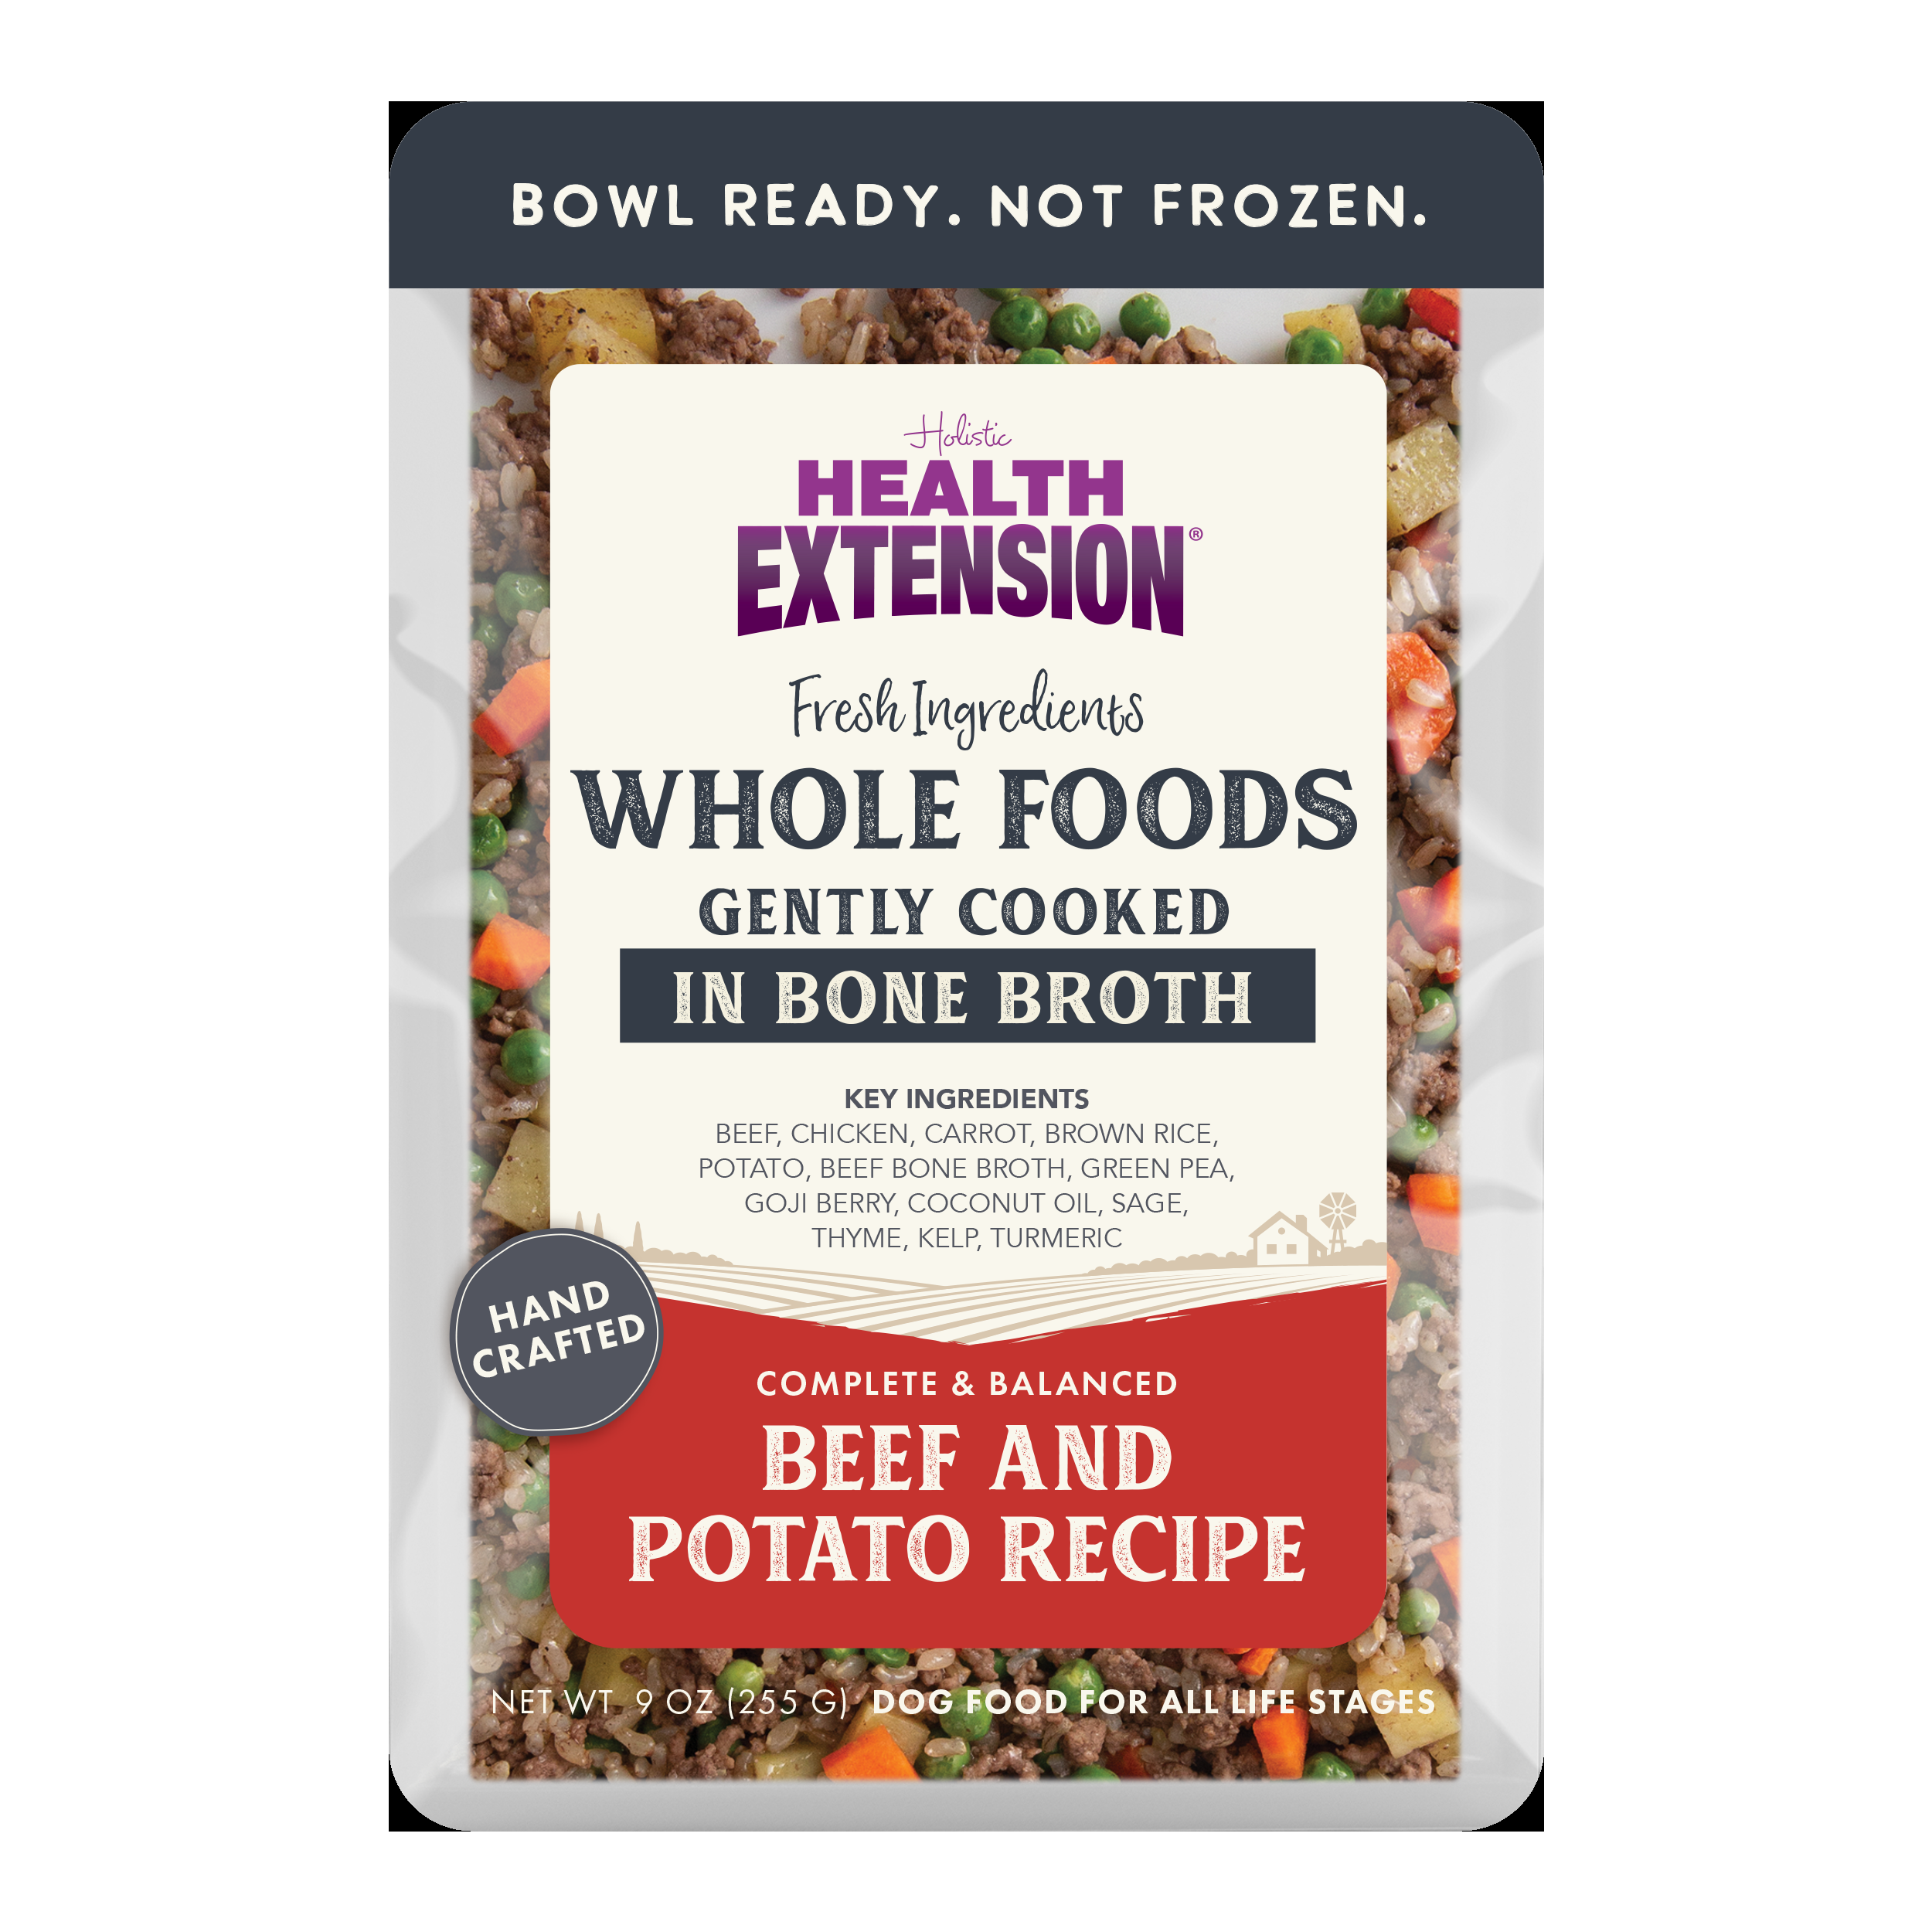 gently-cooked-dog-food with cash back rebate